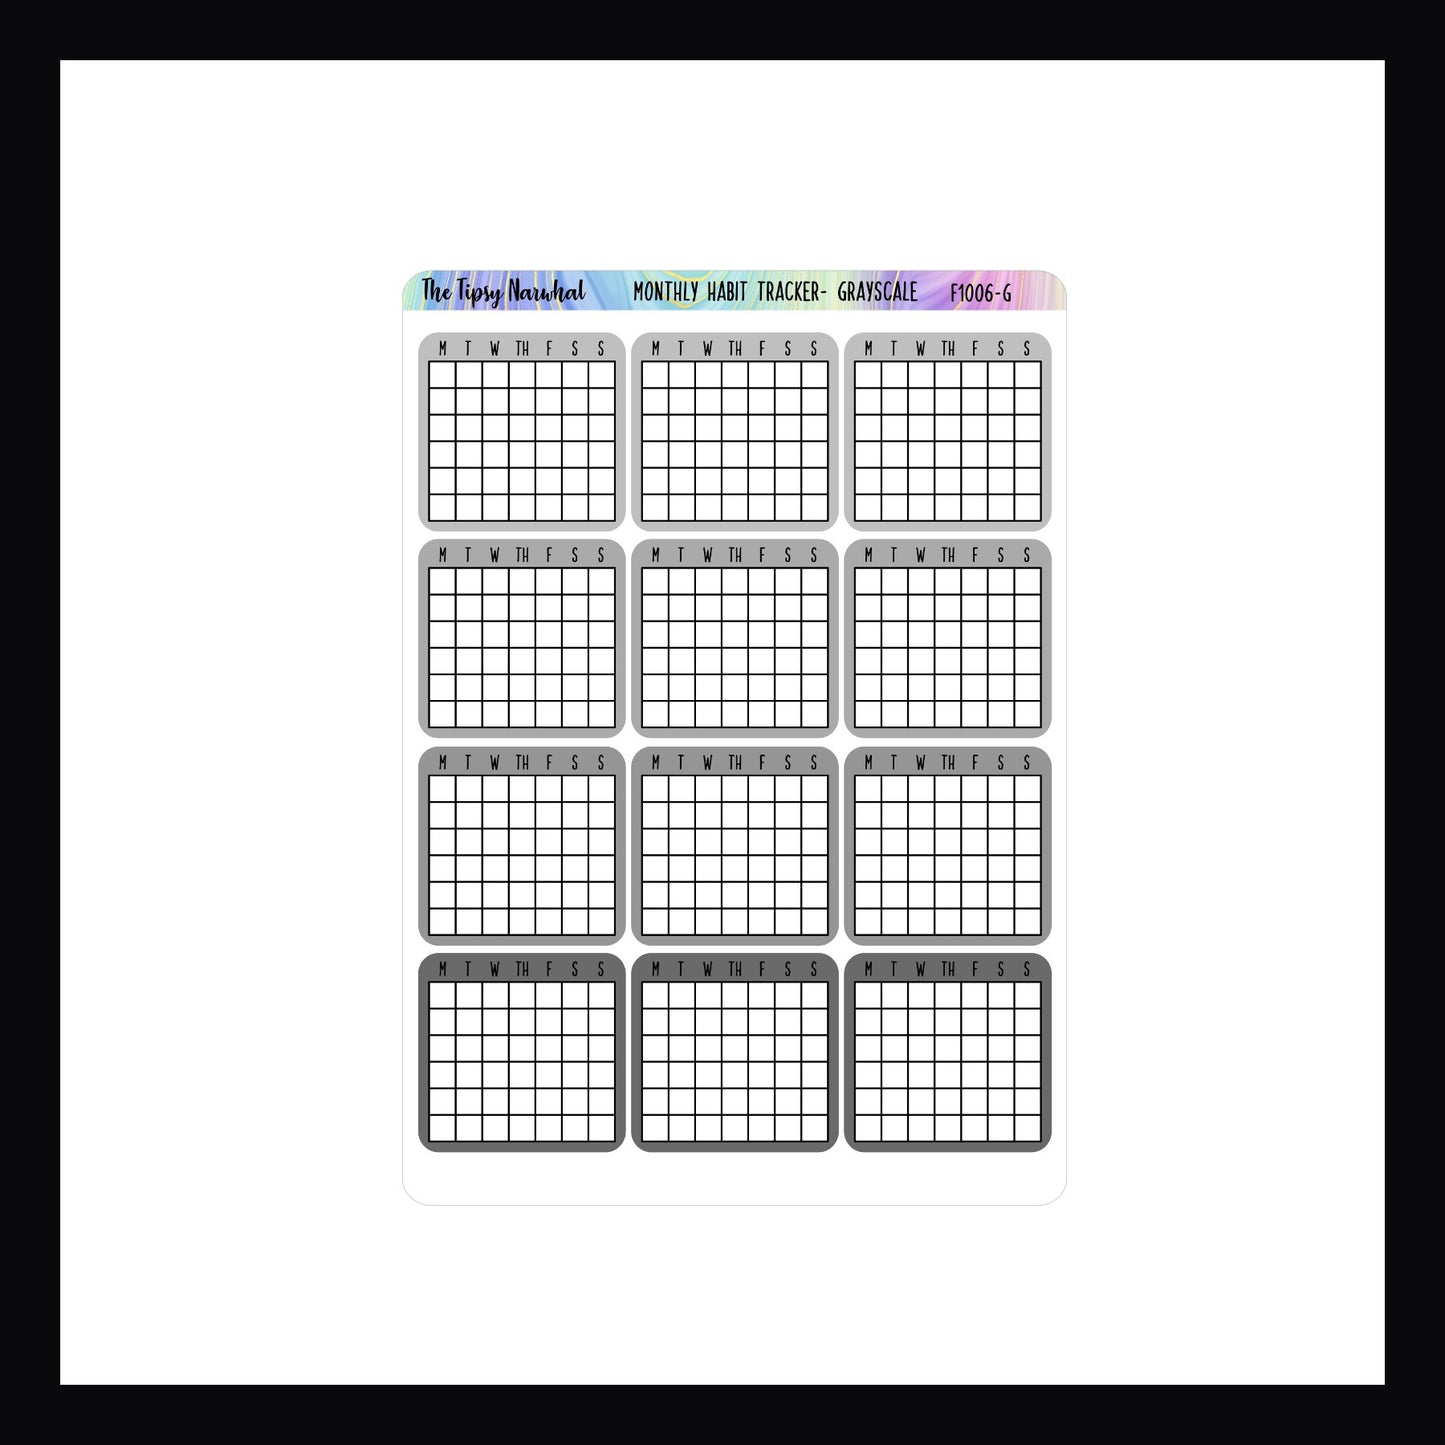 Grayscale monthly habit tracker, 12 individual stickers, single habit tracking, one month tracking